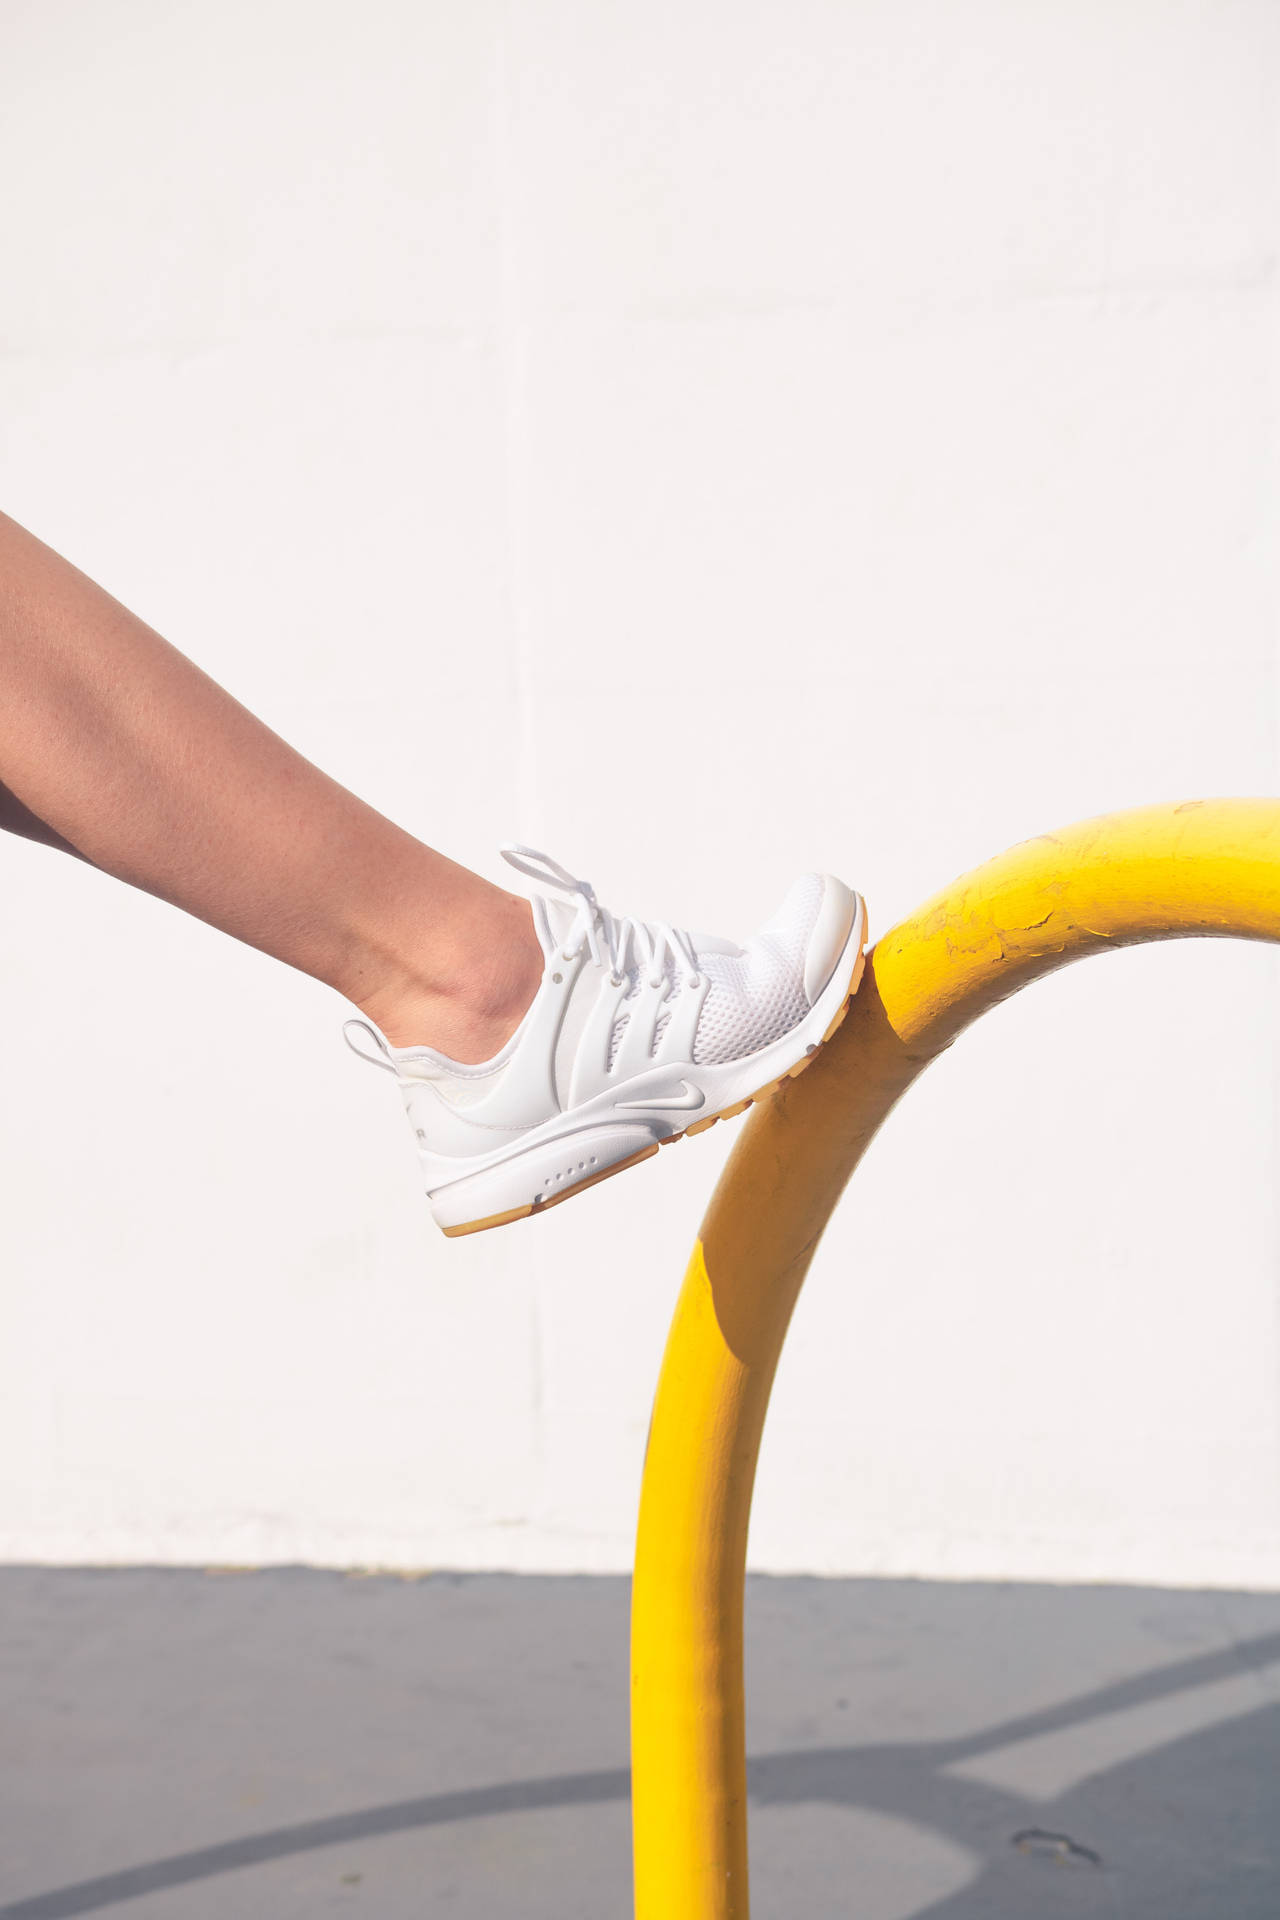 White Rubber Shoes In Yellow Tube Background